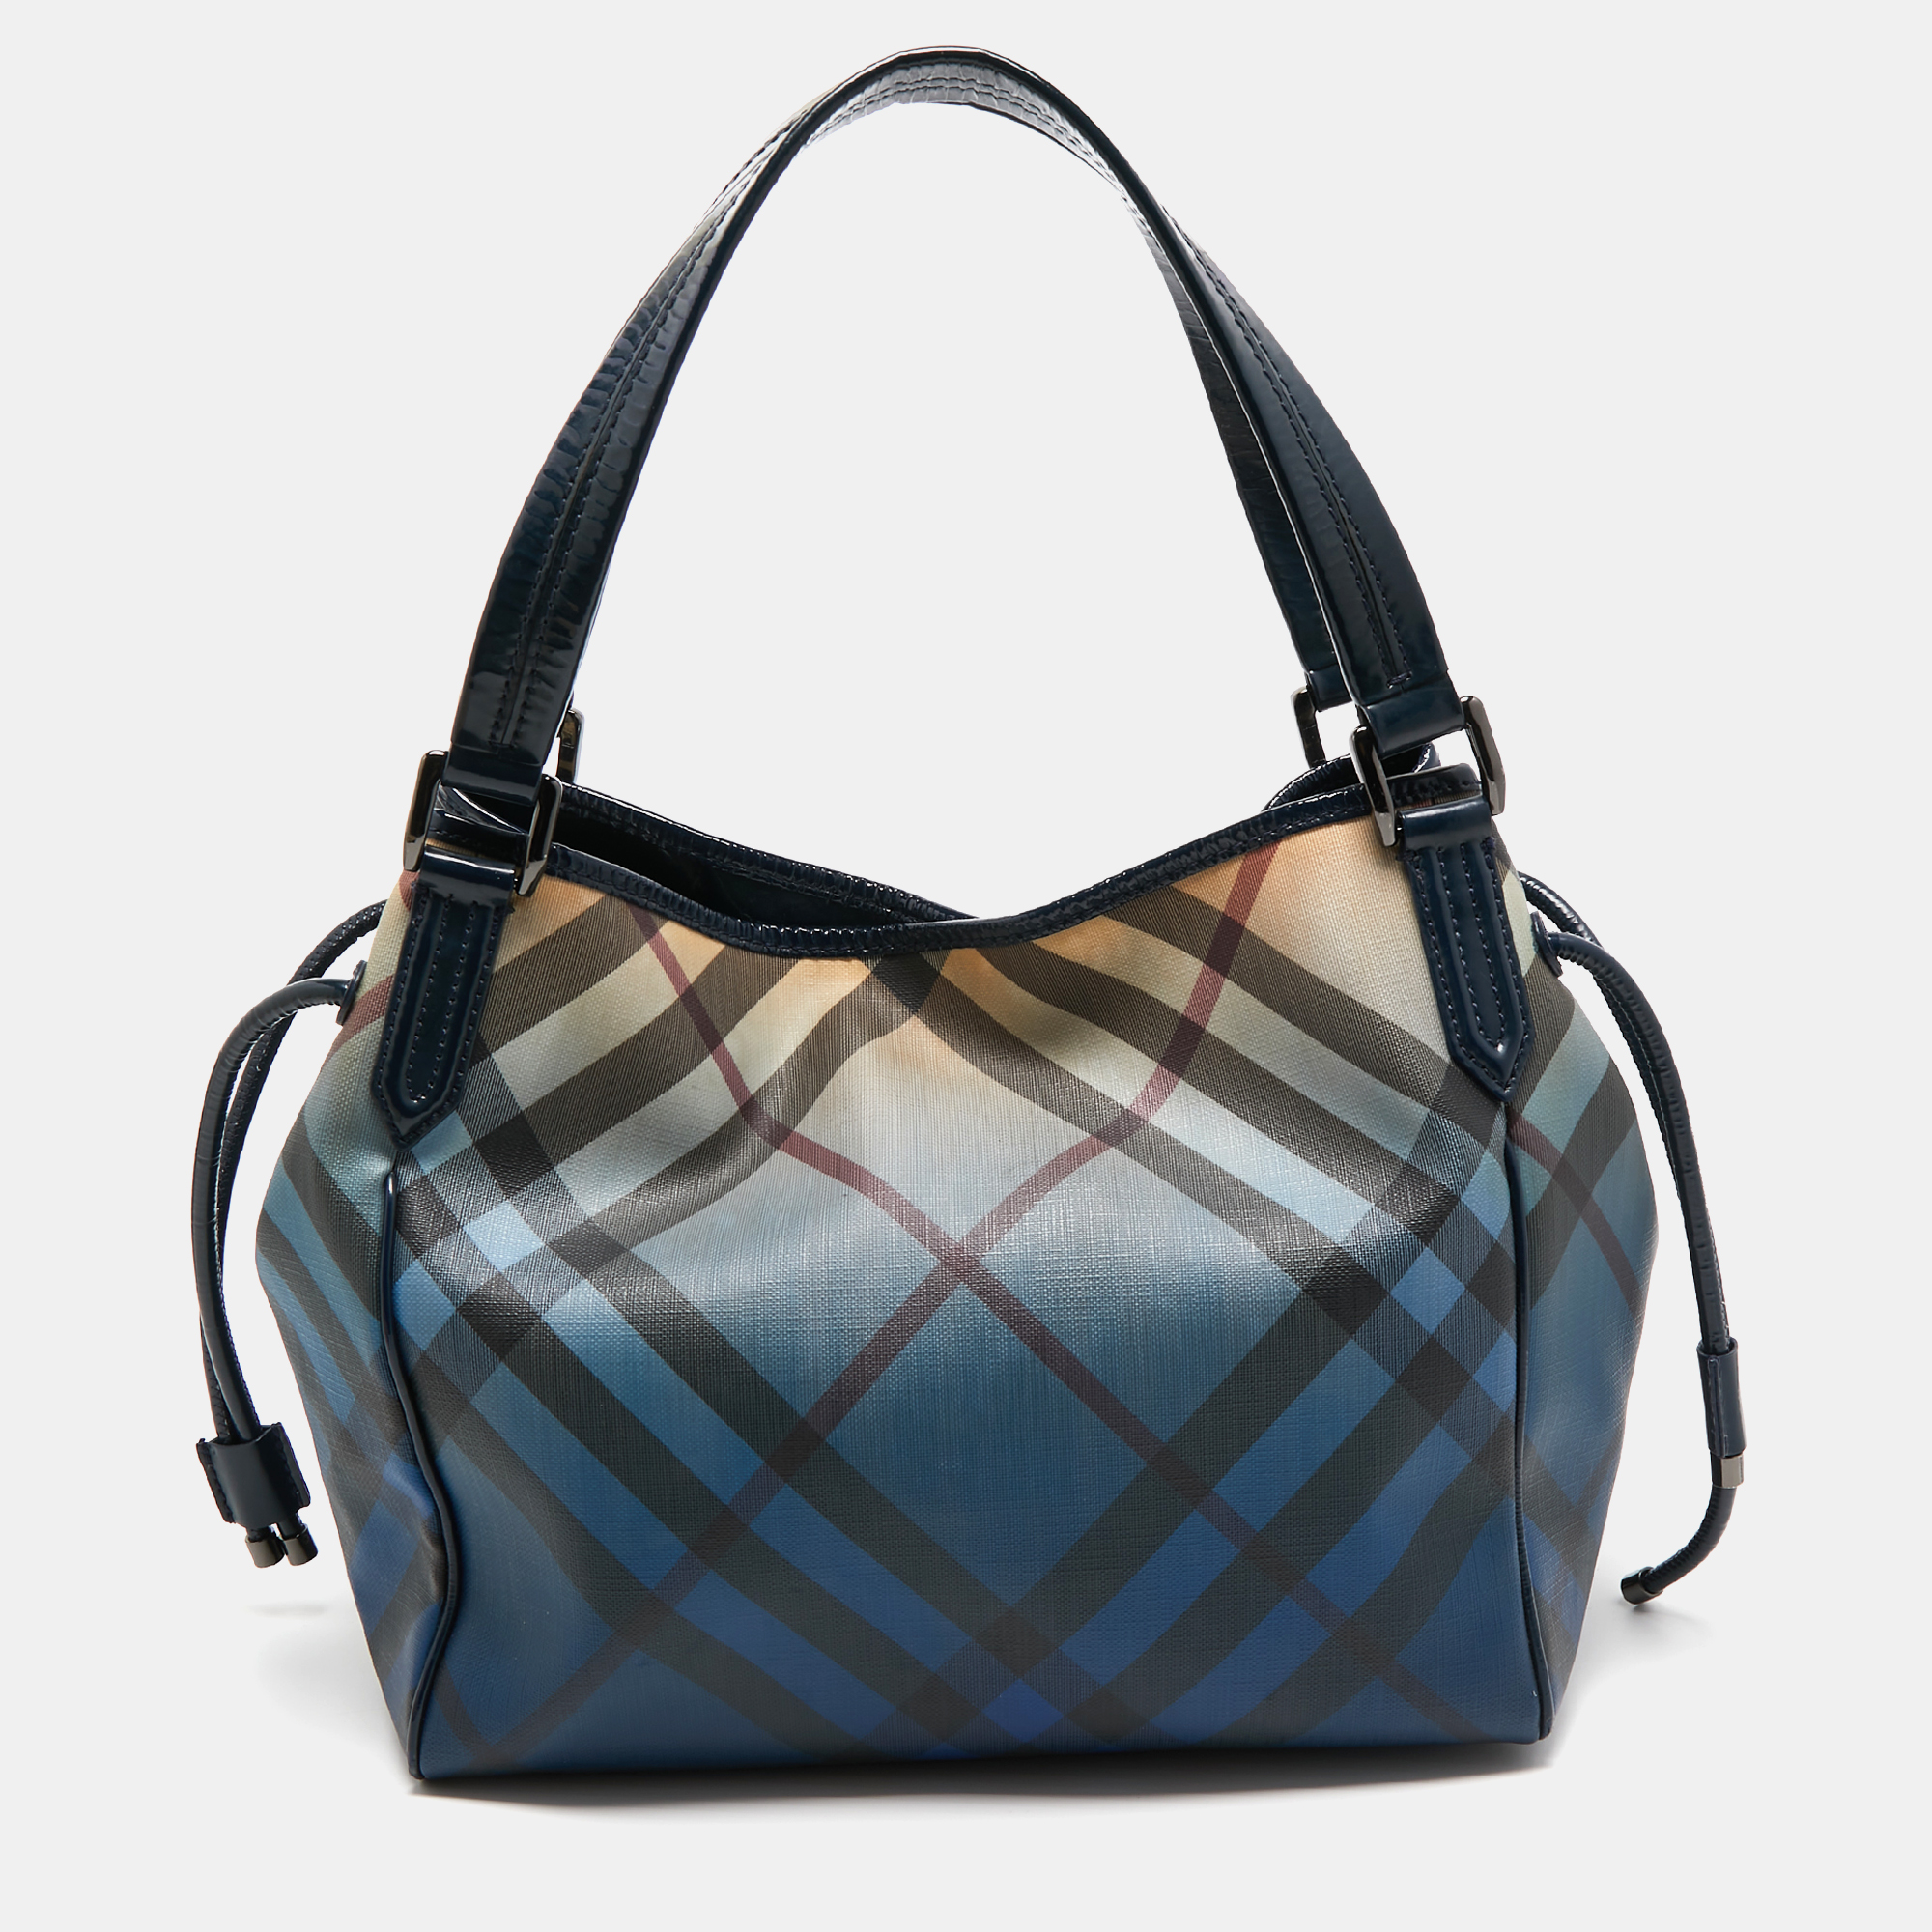 Burberry navy blue/beige ombre pvc and patent leather biltmore tote